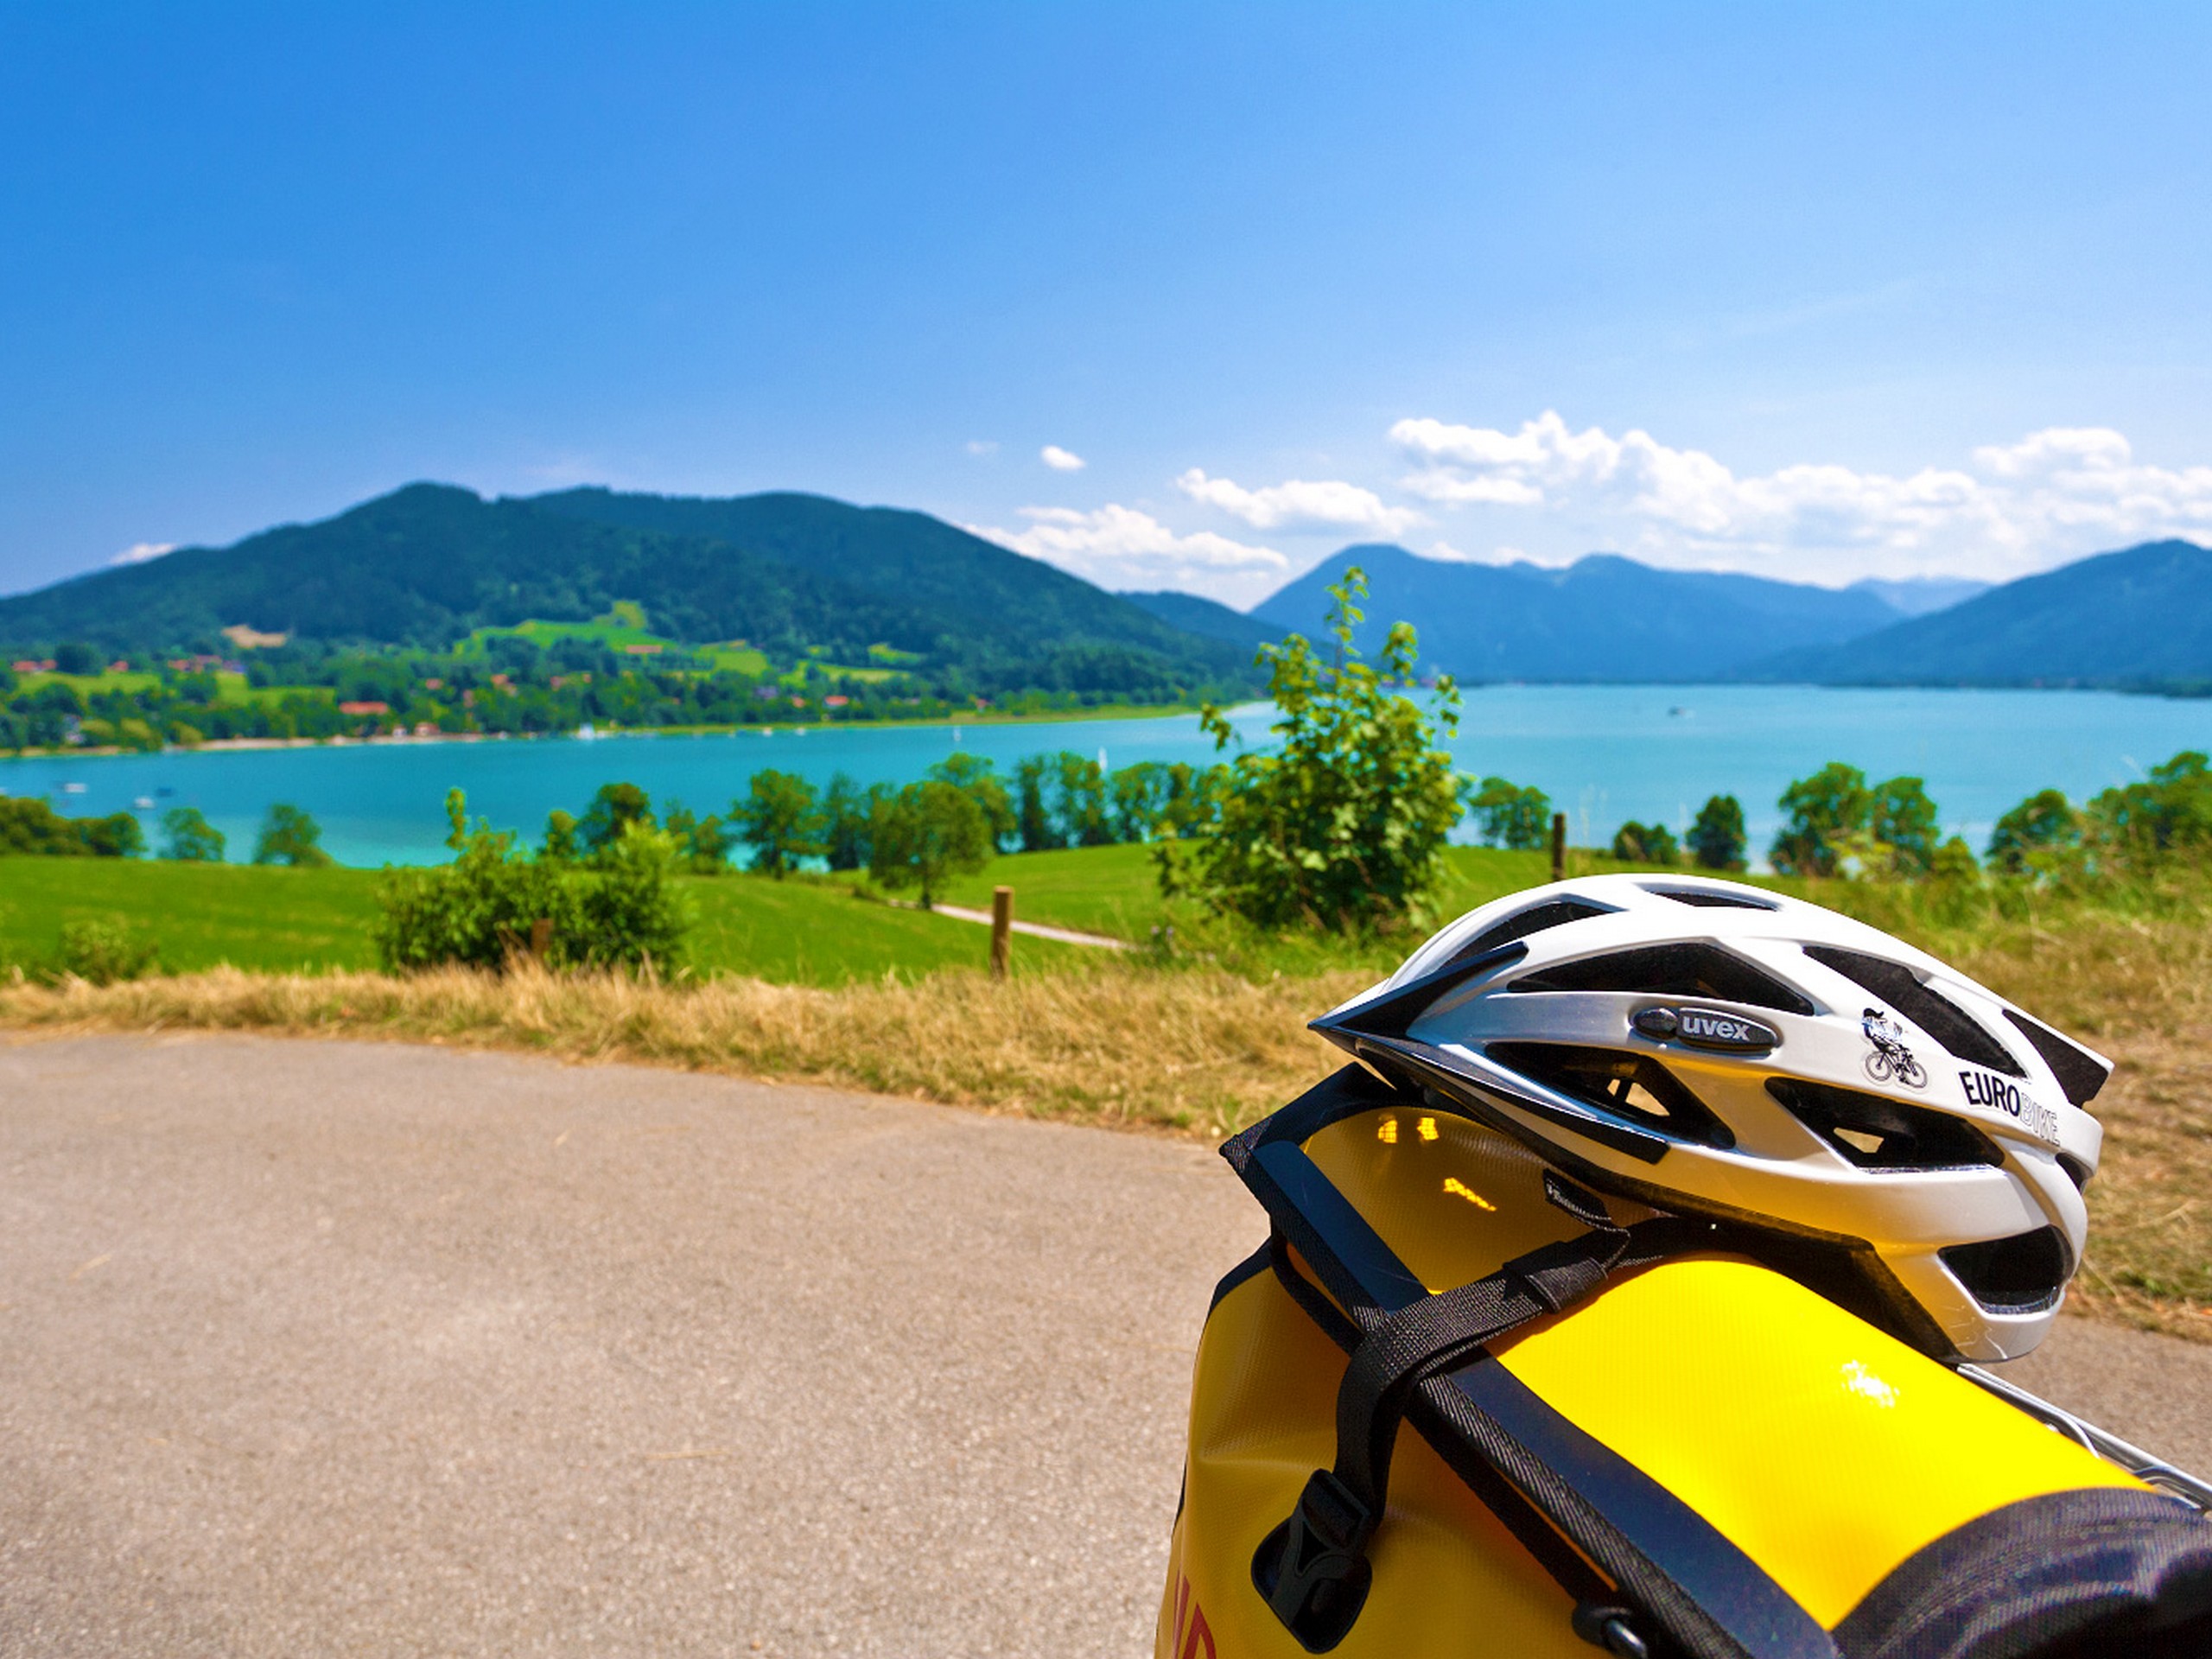 Looking at Tegern Lake in the distance while cycling in Bavaria